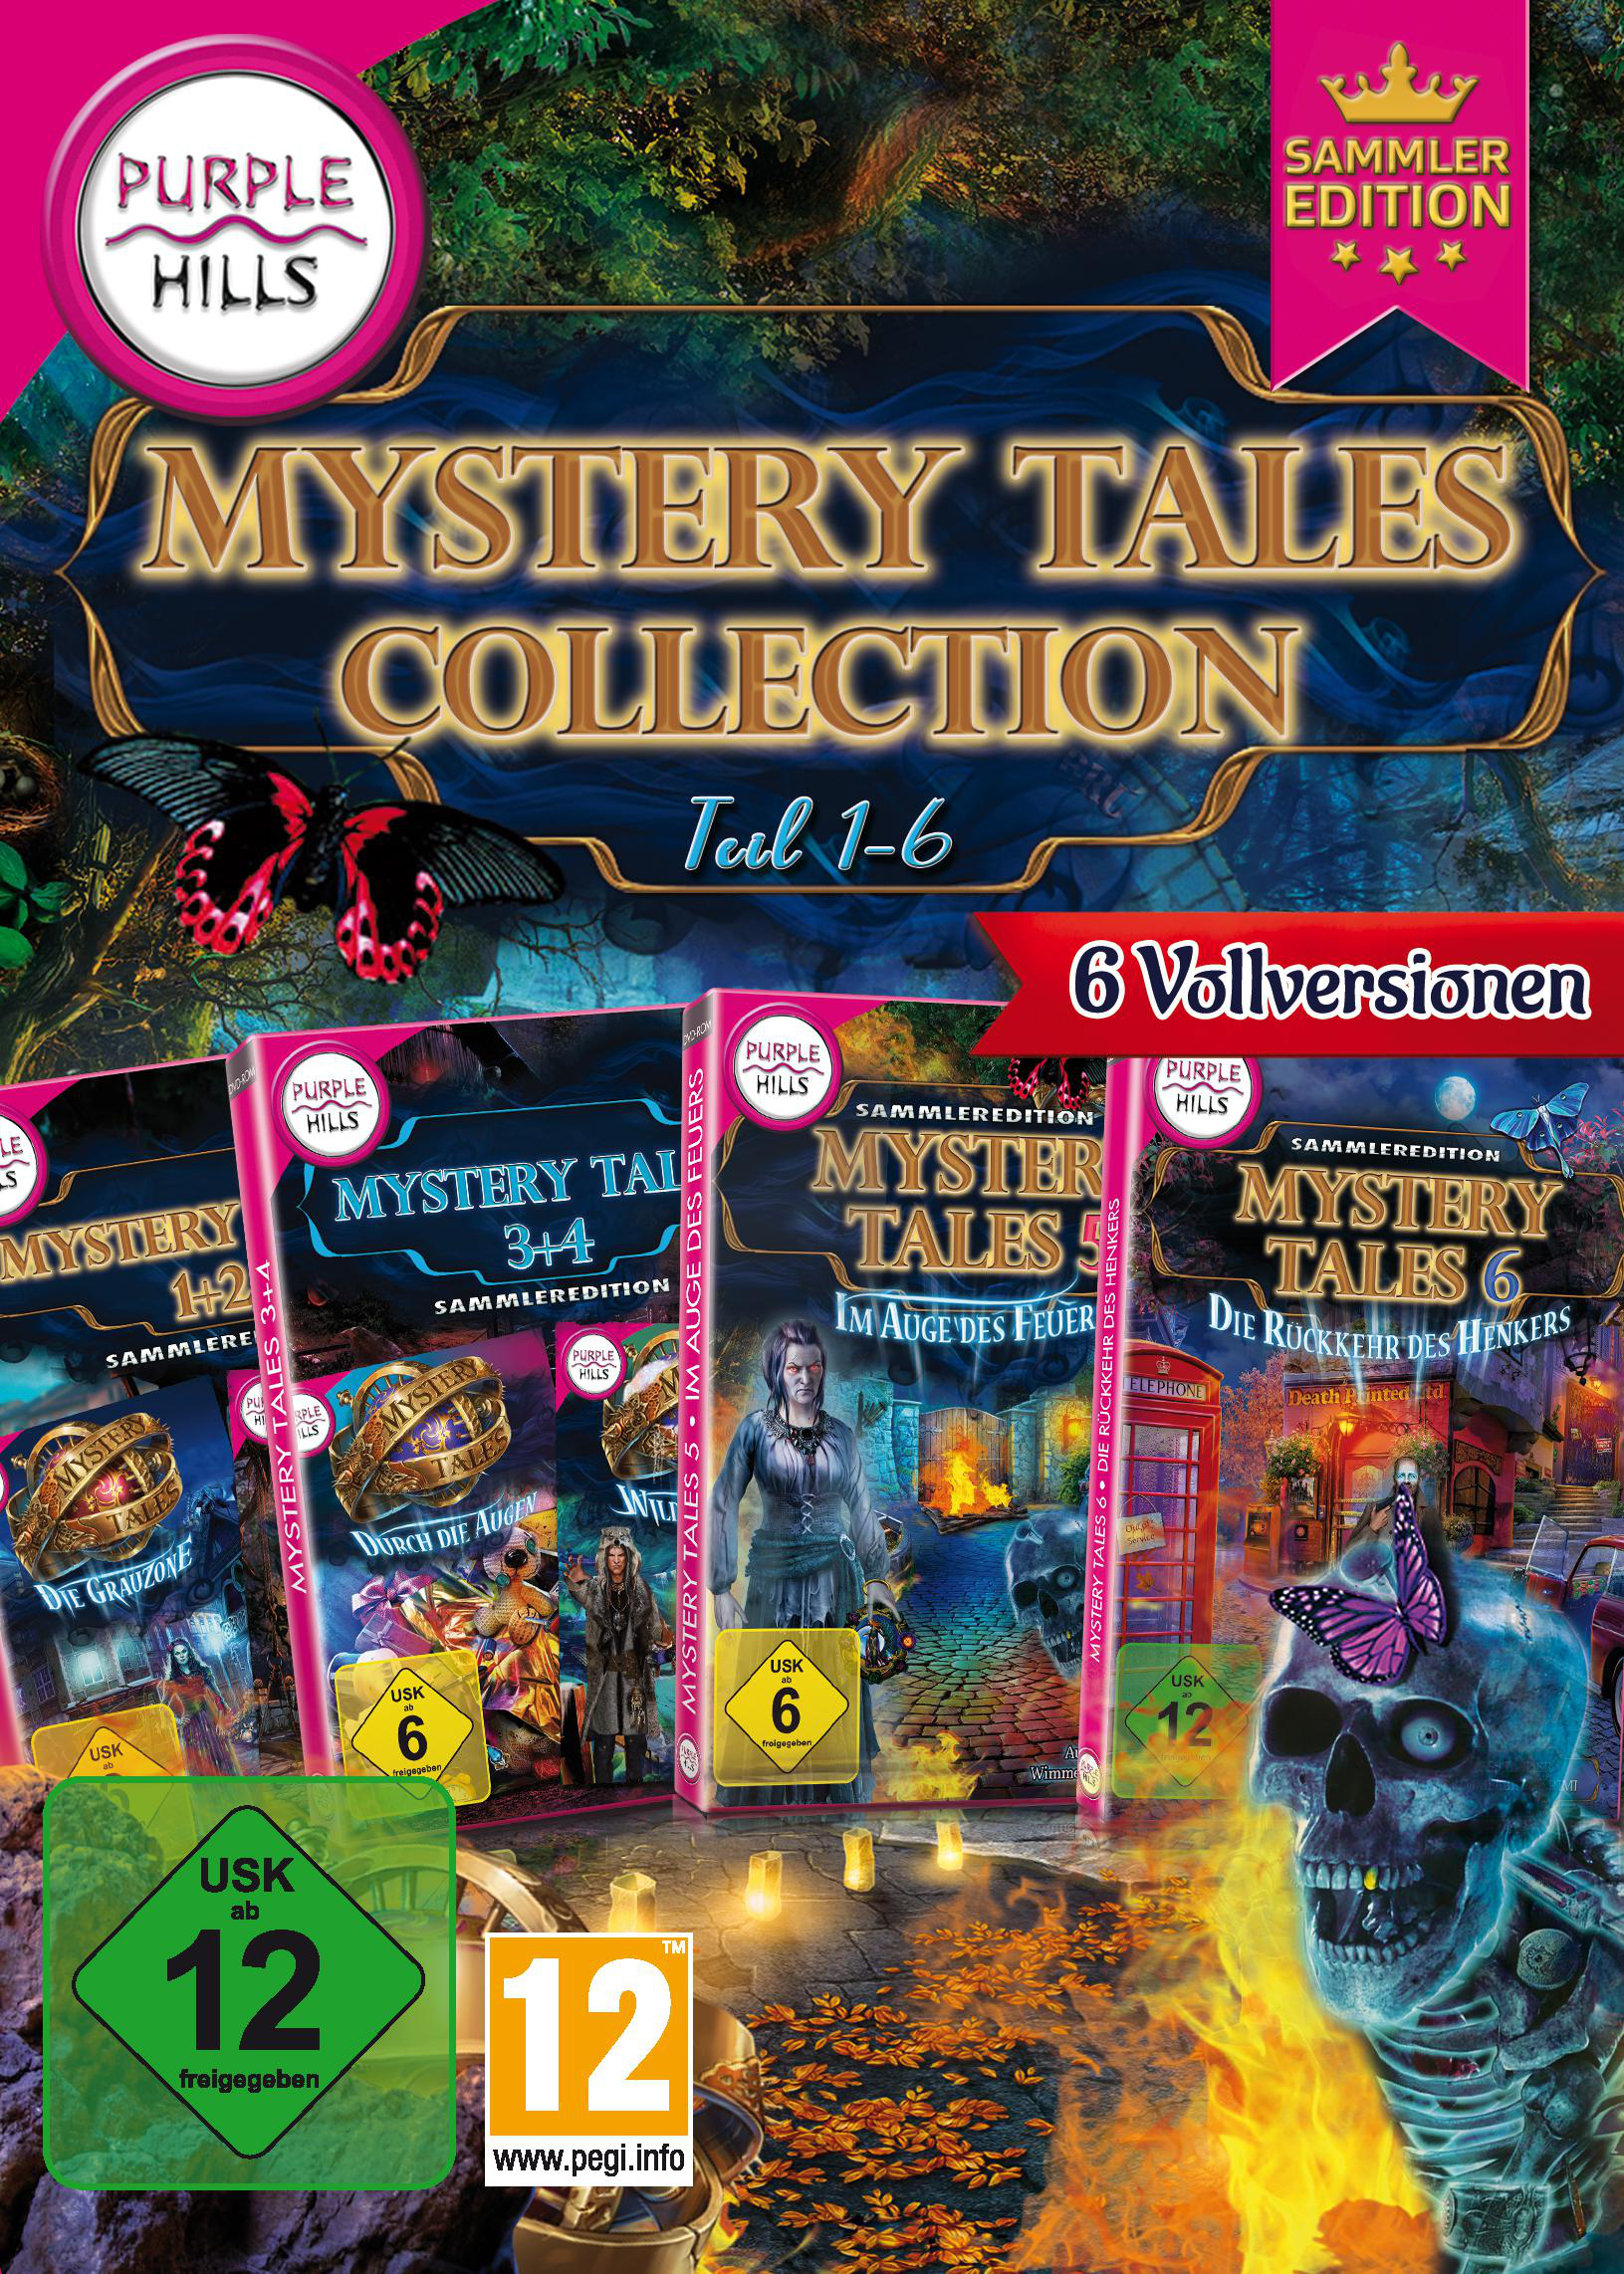 (1-6) COLLECTION TALES MYSTERY